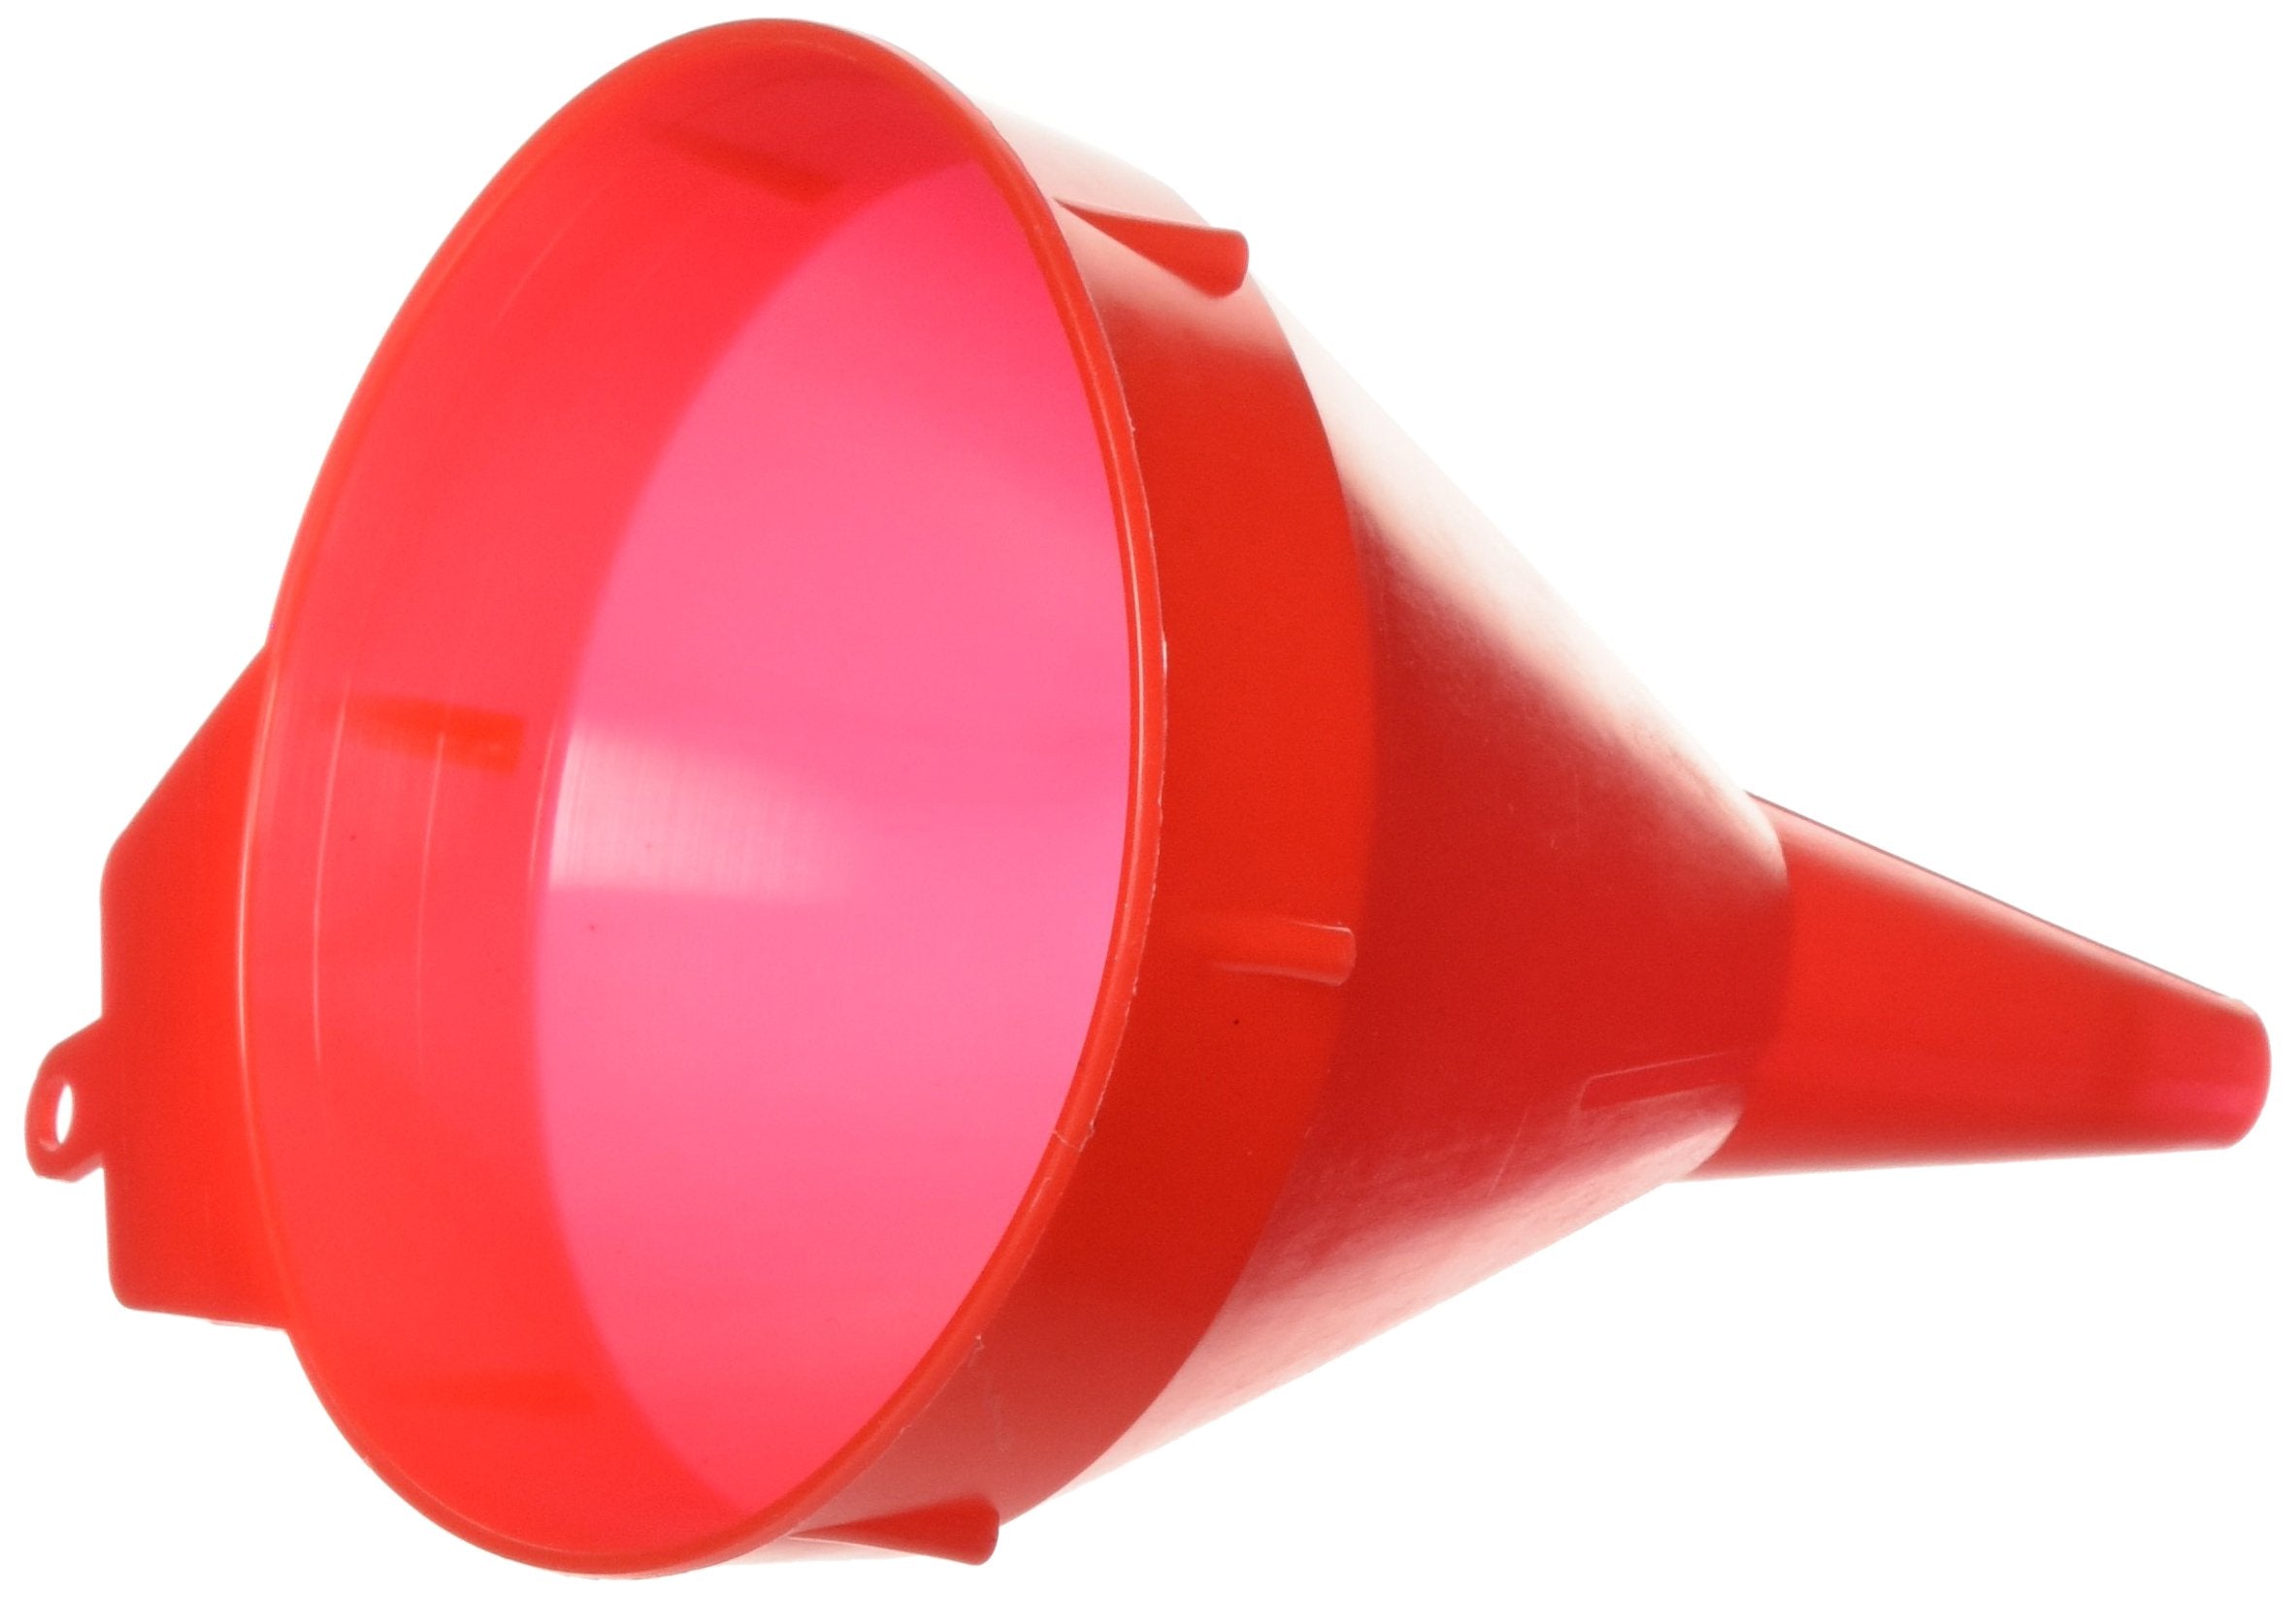 WirthCo 32091 Funnel King Red Polyethylene Safety Funnel - 1 Pint Capacity